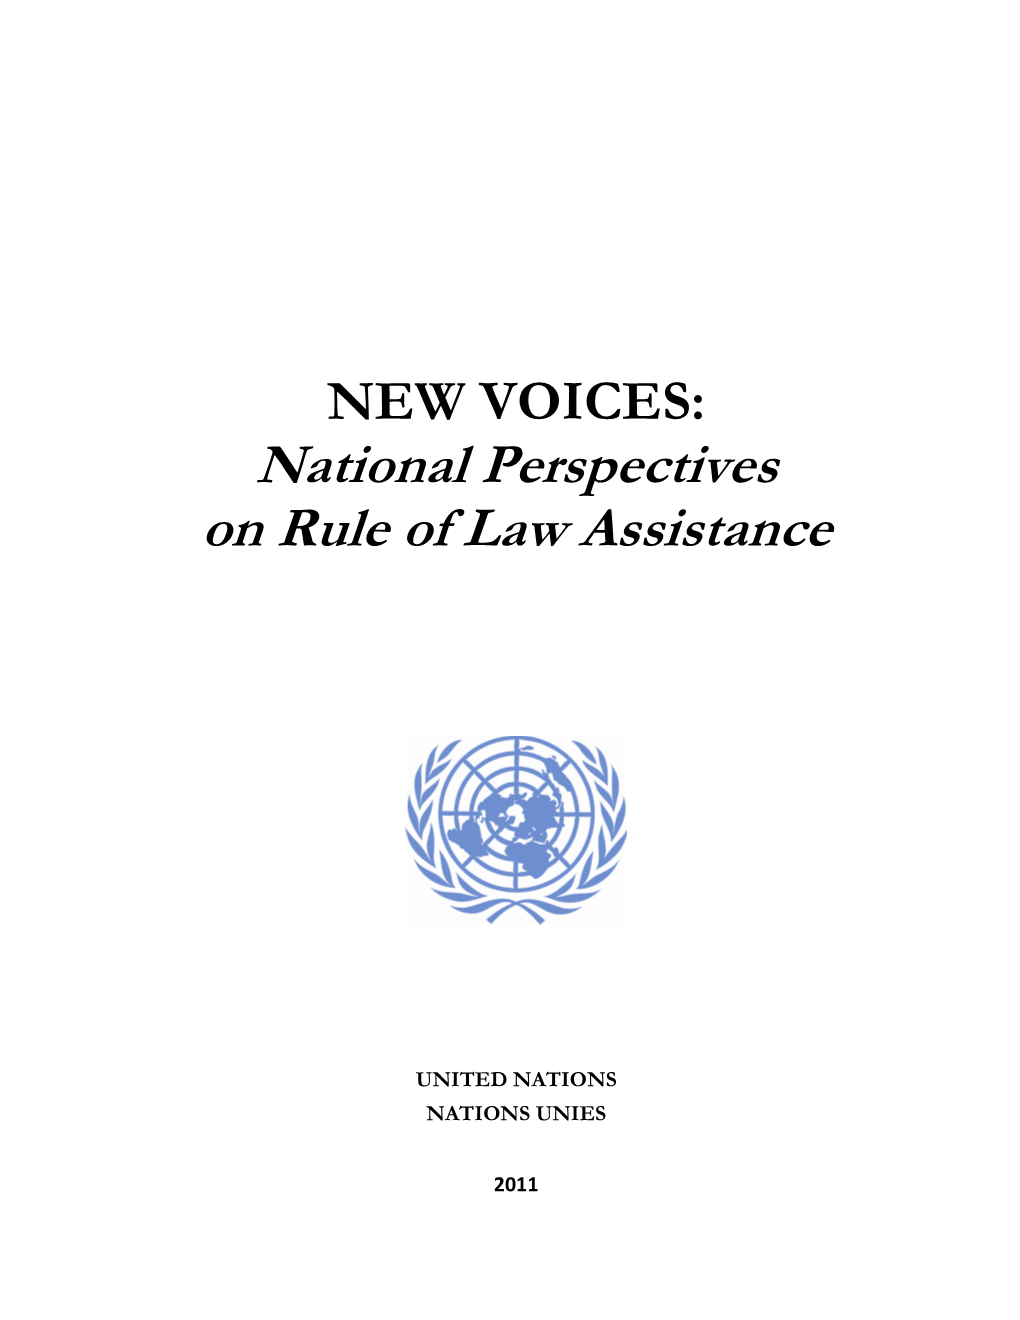 FINAL National Perspectives Report